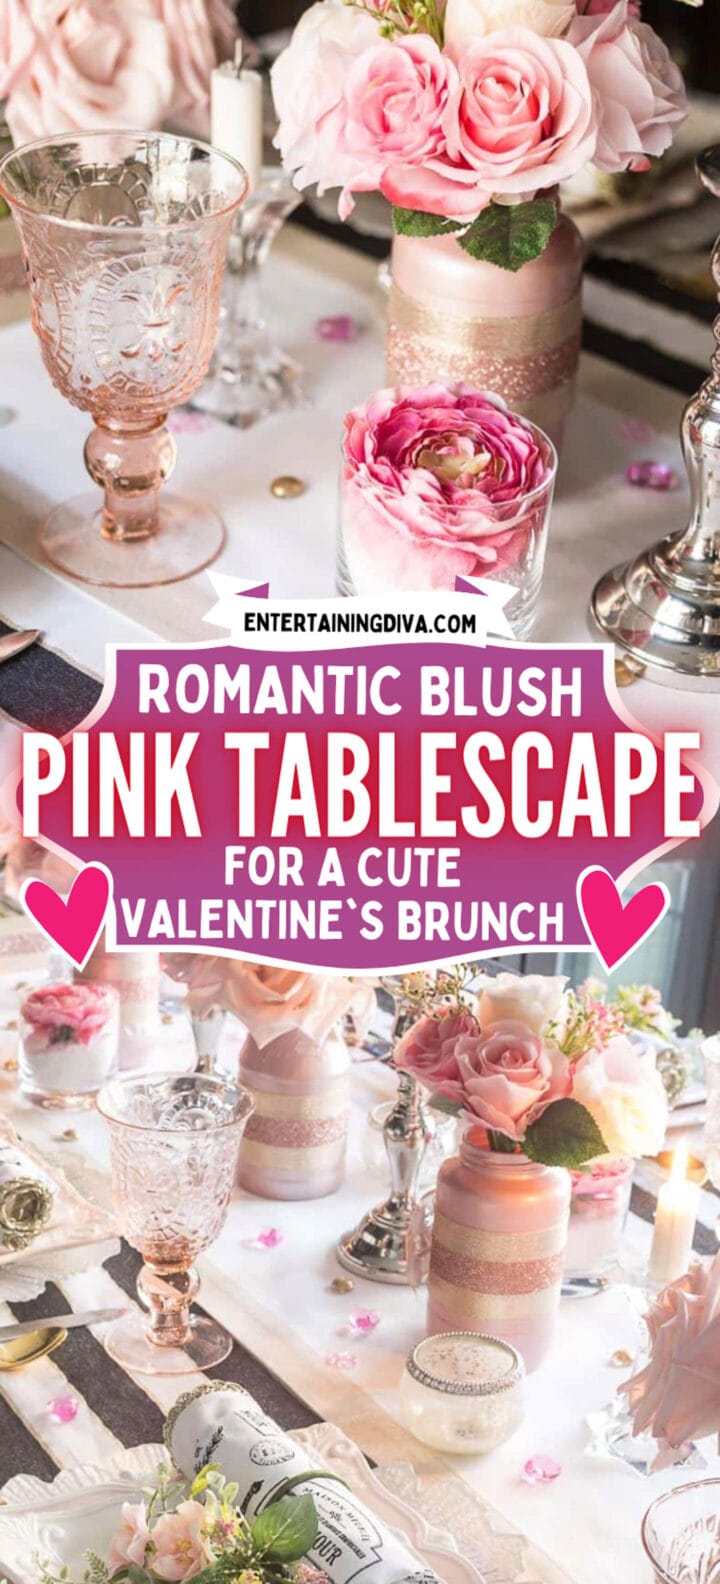 Romantic Blush Pink Tablescape (That Will Make Your Guests Swoon)